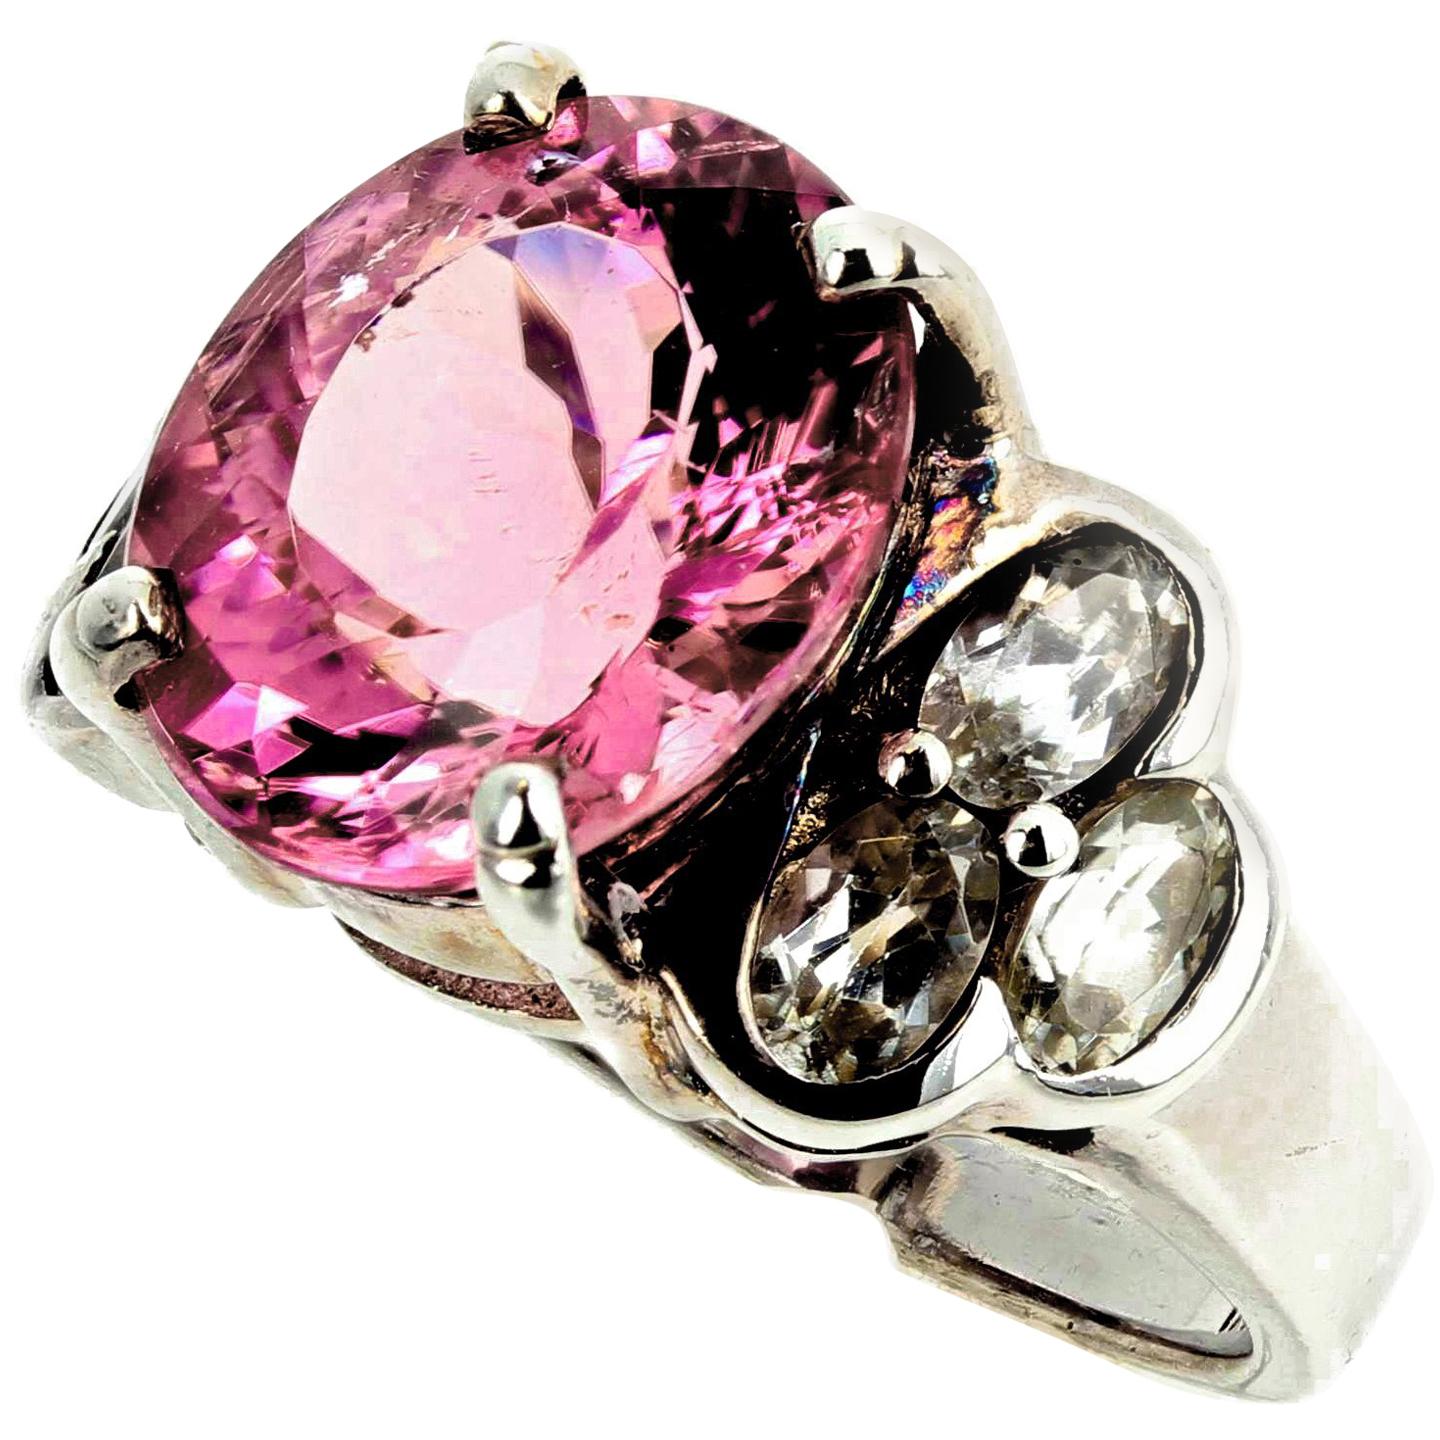 AJD Beautiful 4 Cts Sparkling Pink Tourmaline & Silver Quartz Silver Ring For Sale